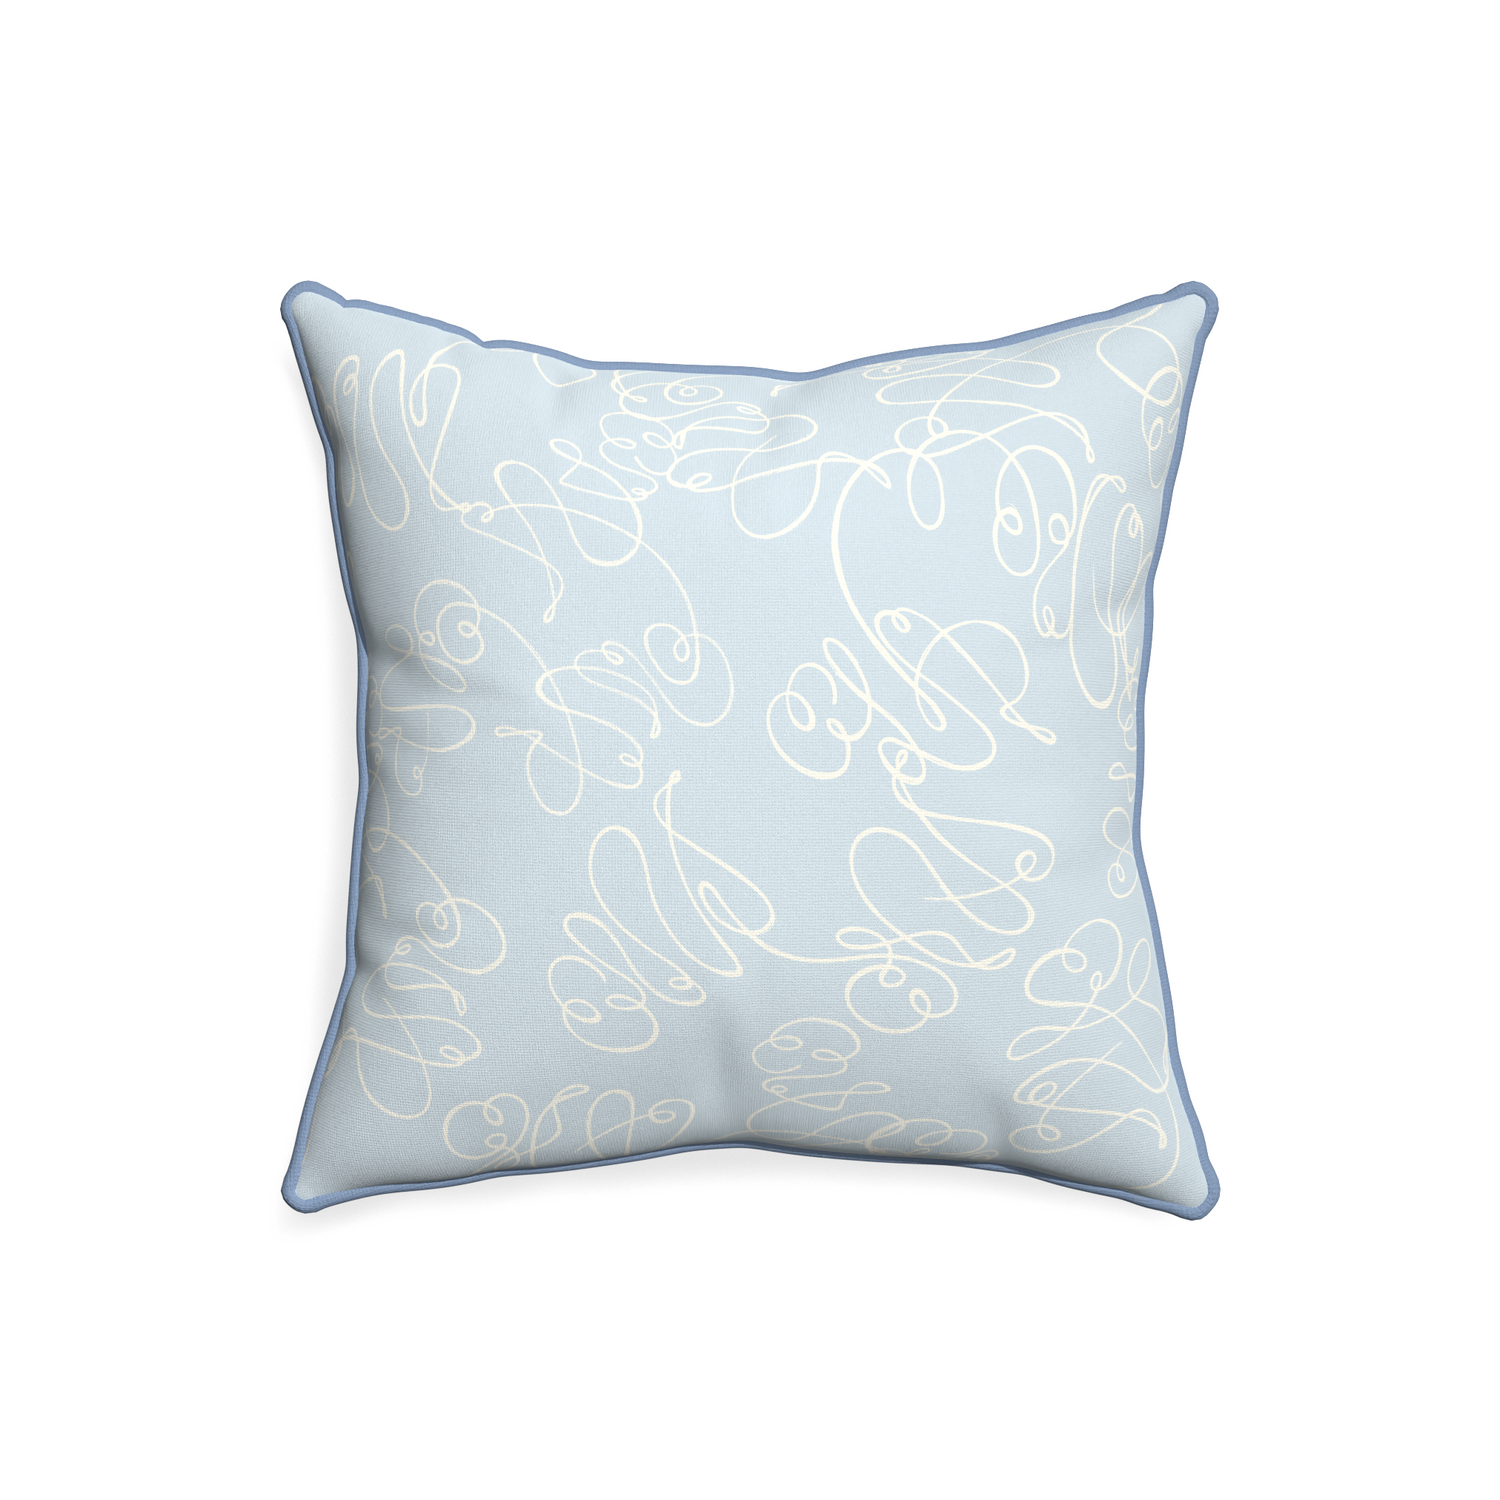 20-square mirabella custom powder blue abstractpillow with sky piping on white background